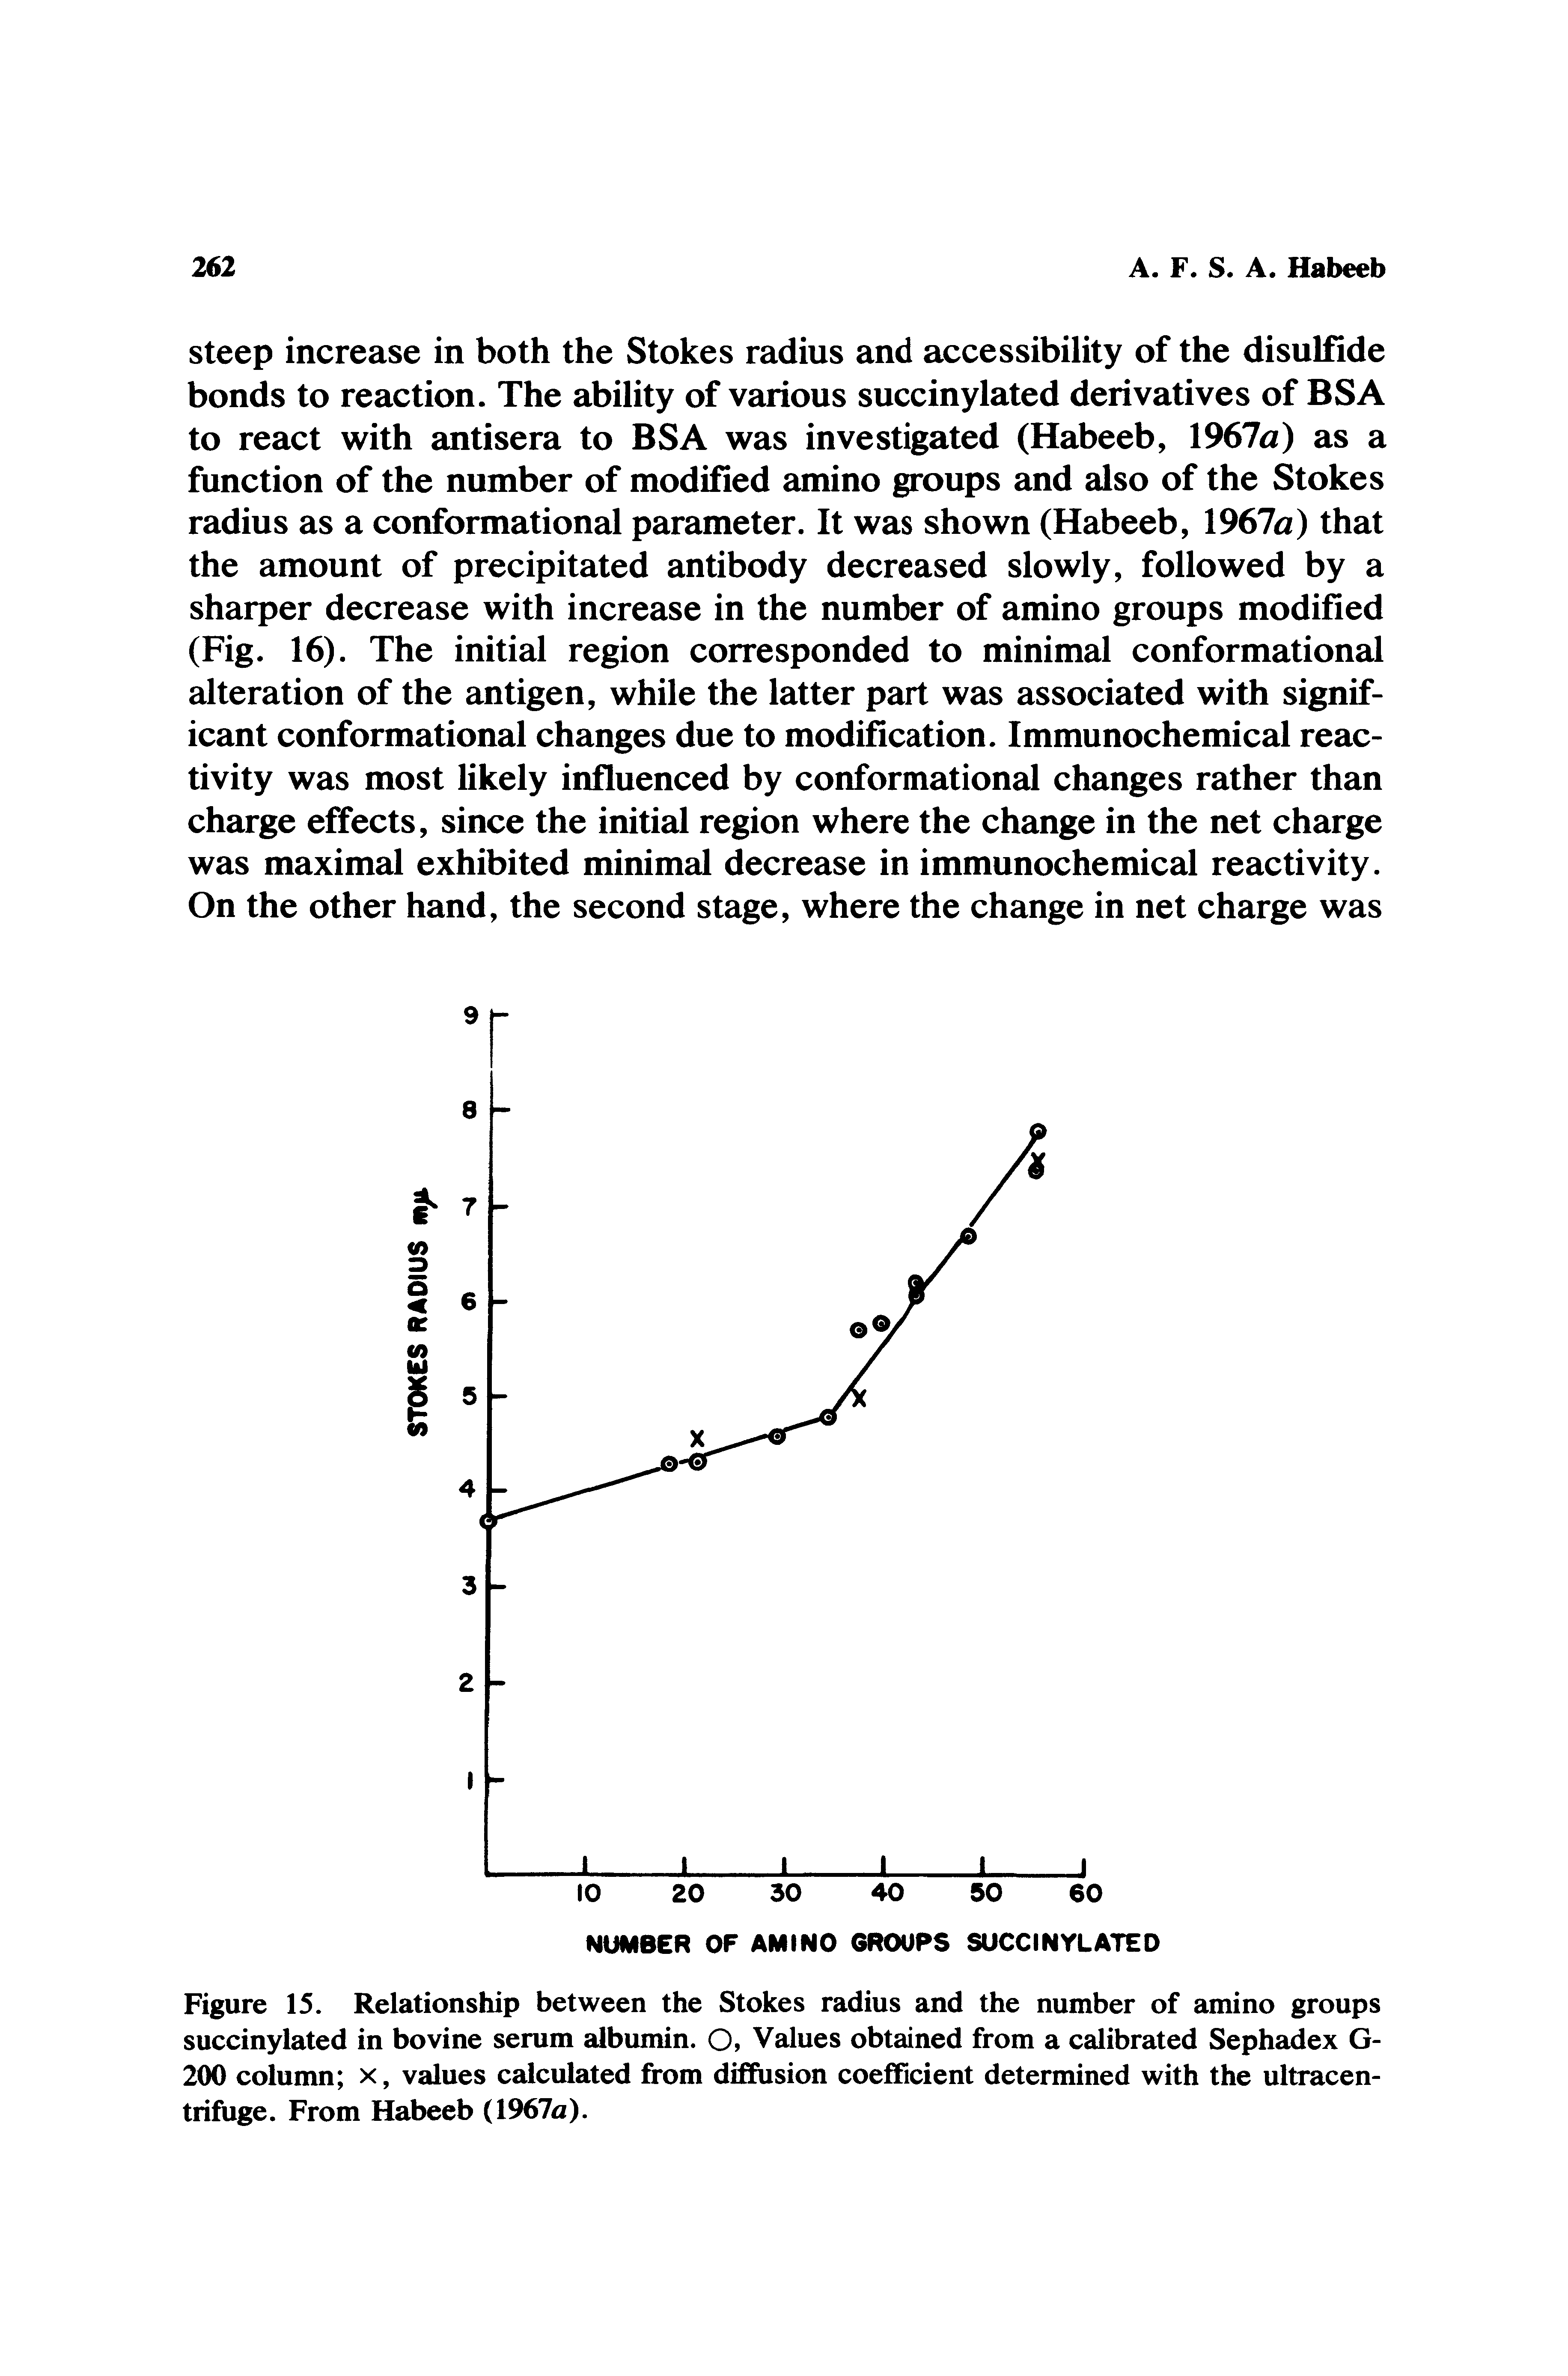 Figure 15. Relationship between the Stokes radius and the number of amino groups succinylated in bovine serum albumin. O, Values obtained from a calibrated Sephadex G-200 column x, values calculated from diffusion coefficient determined with the ultracentrifuge. From Habeeb ( 1967a ).